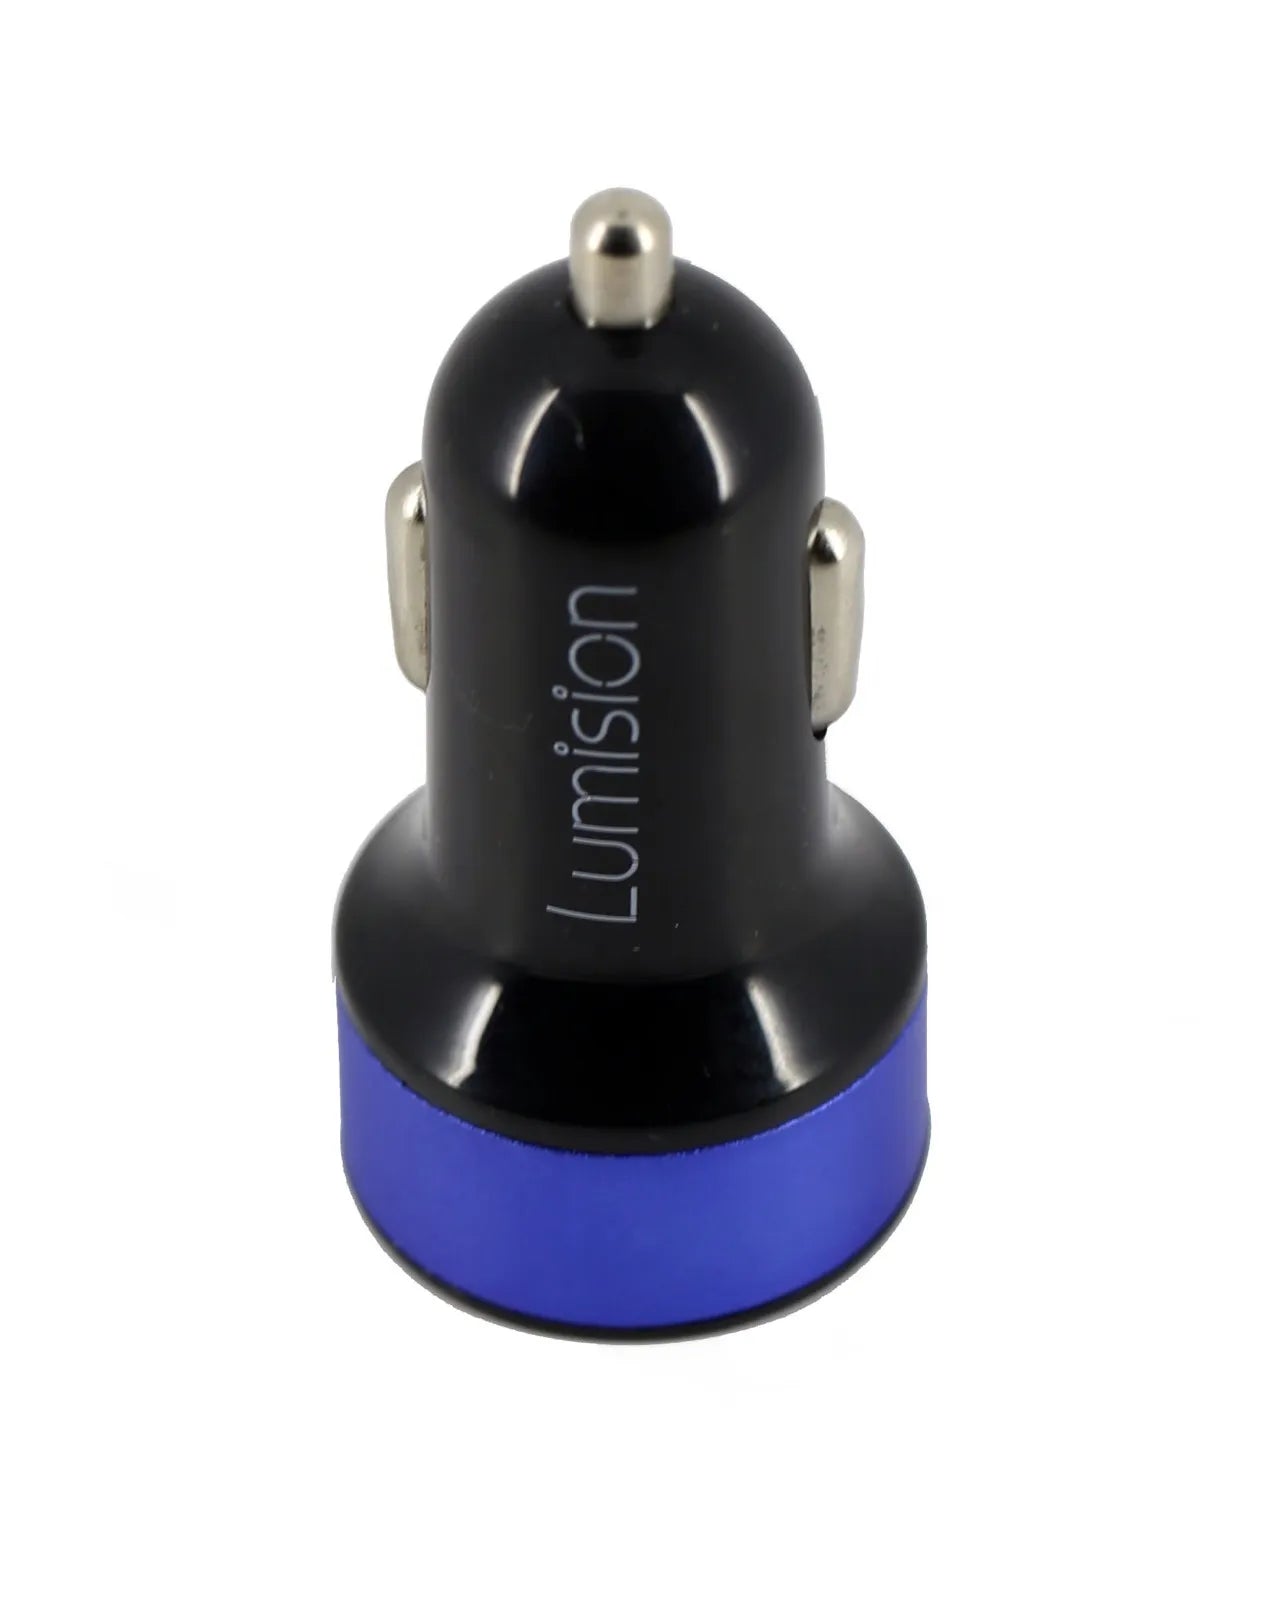 Black/Blue USB Car Charger Dual 2 Port for iPhone Samsung HTC 3.1a 2.1a travel